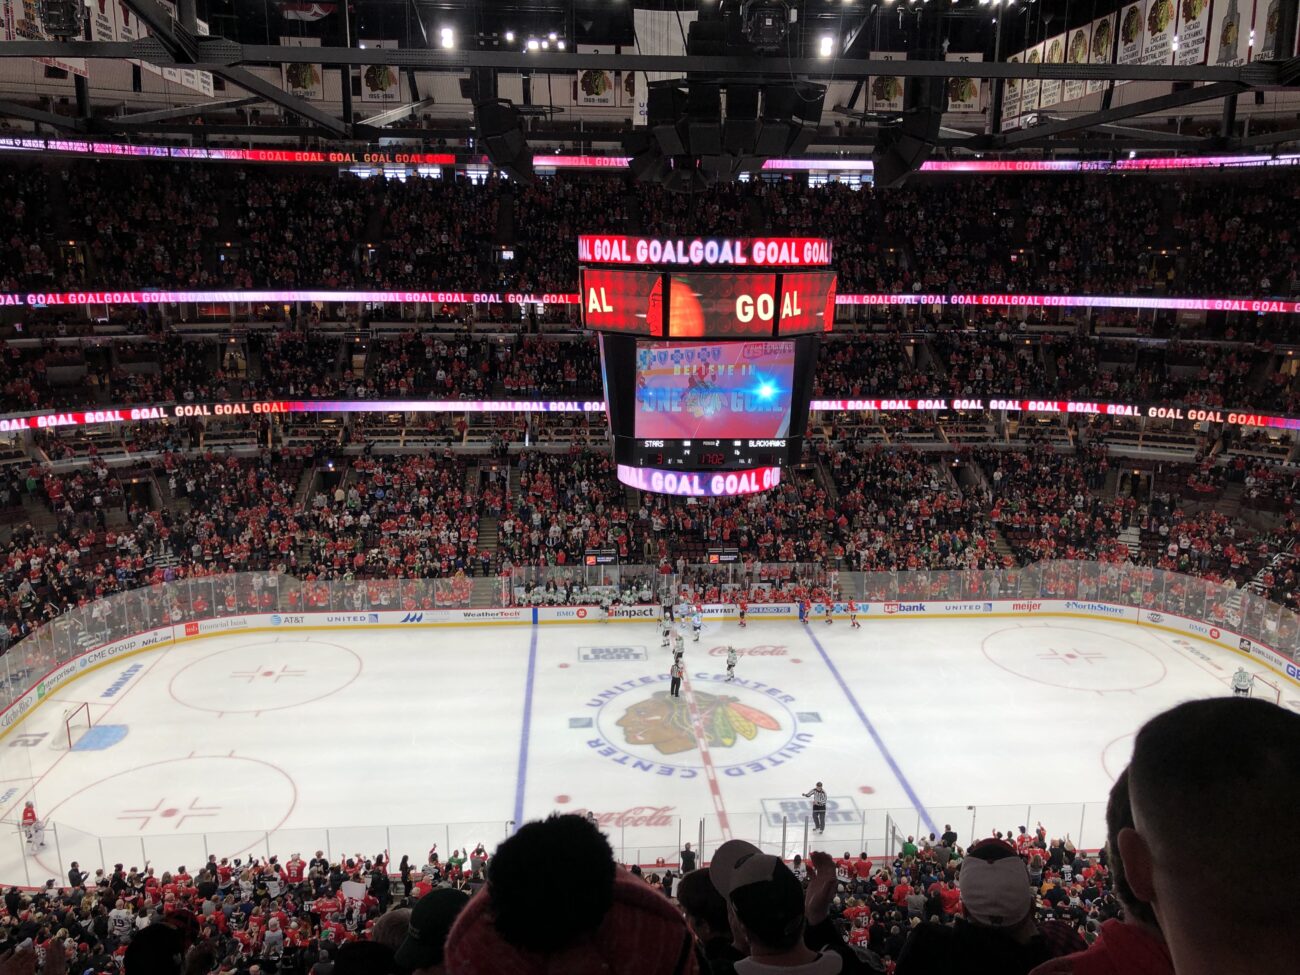 Guide To United Center - CBS Chicago